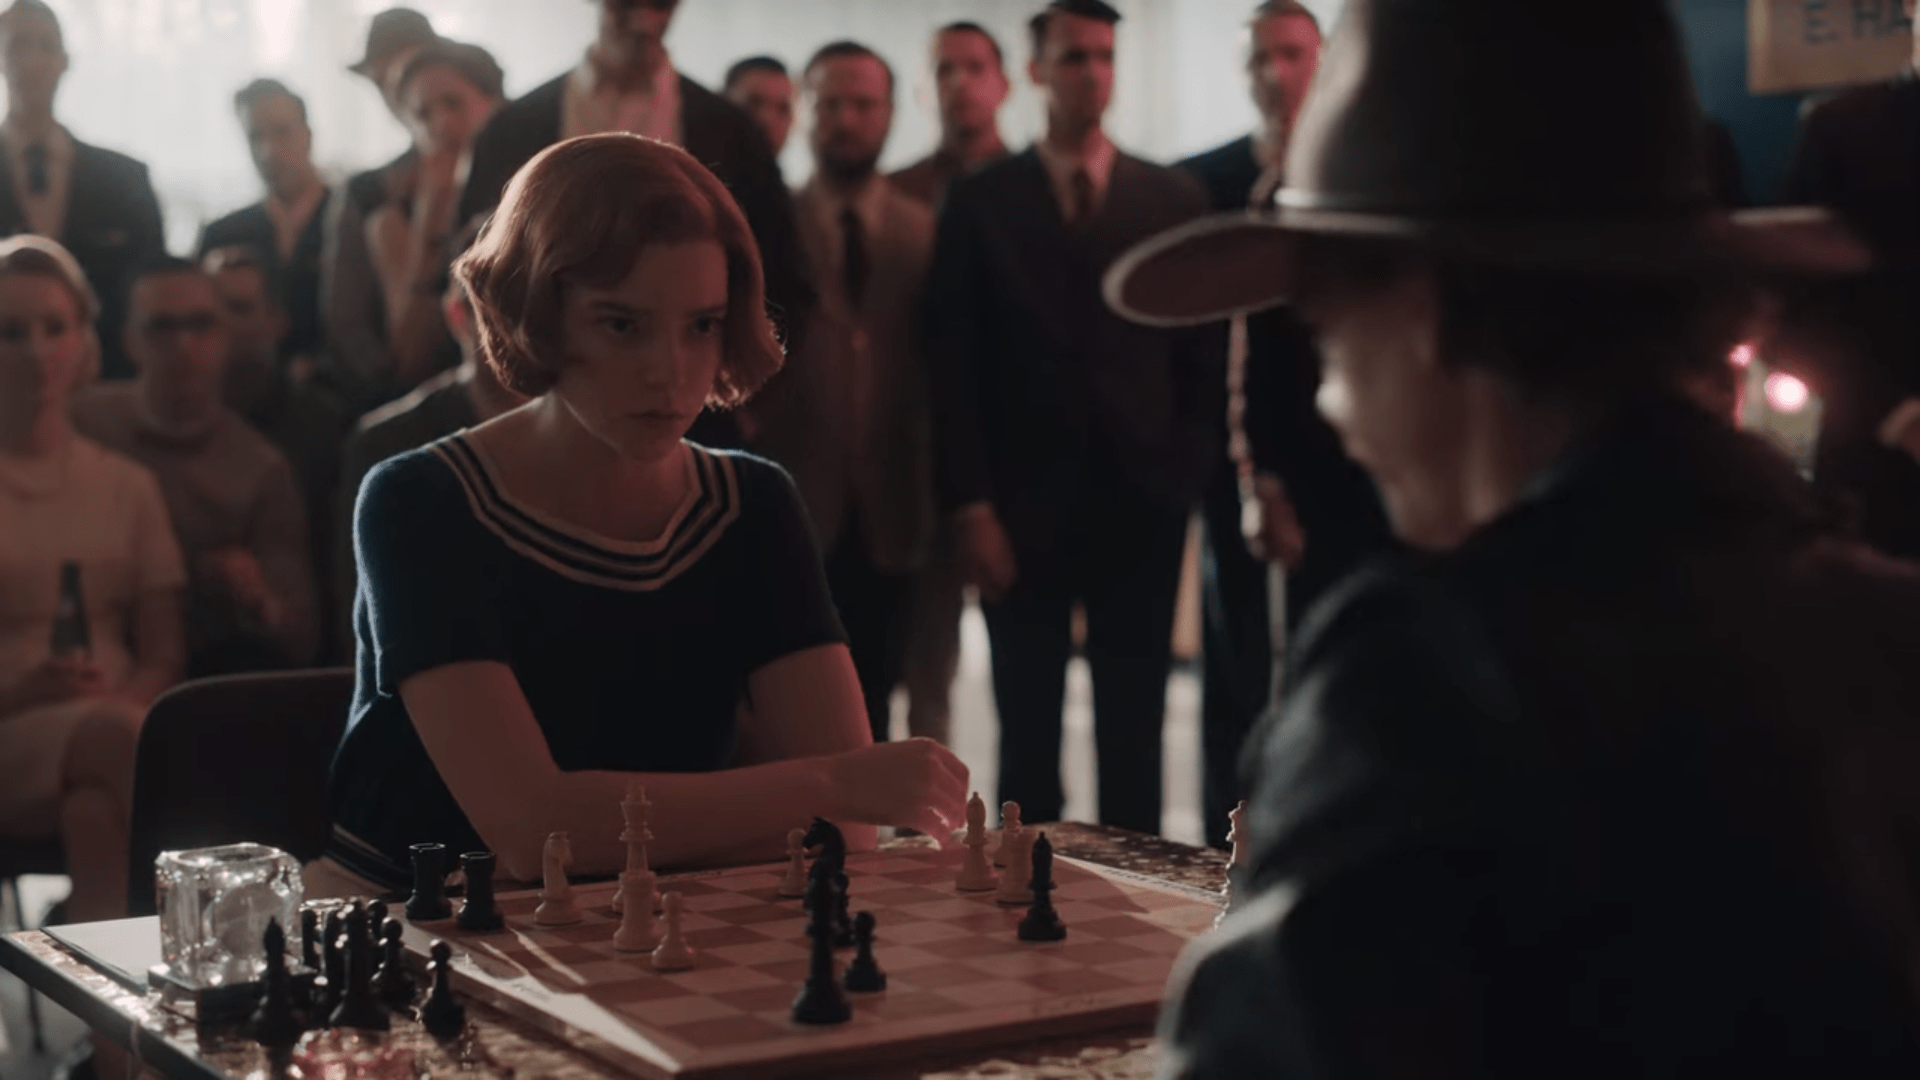 ▷ 3 Exciting Chess Games With Two Queens!